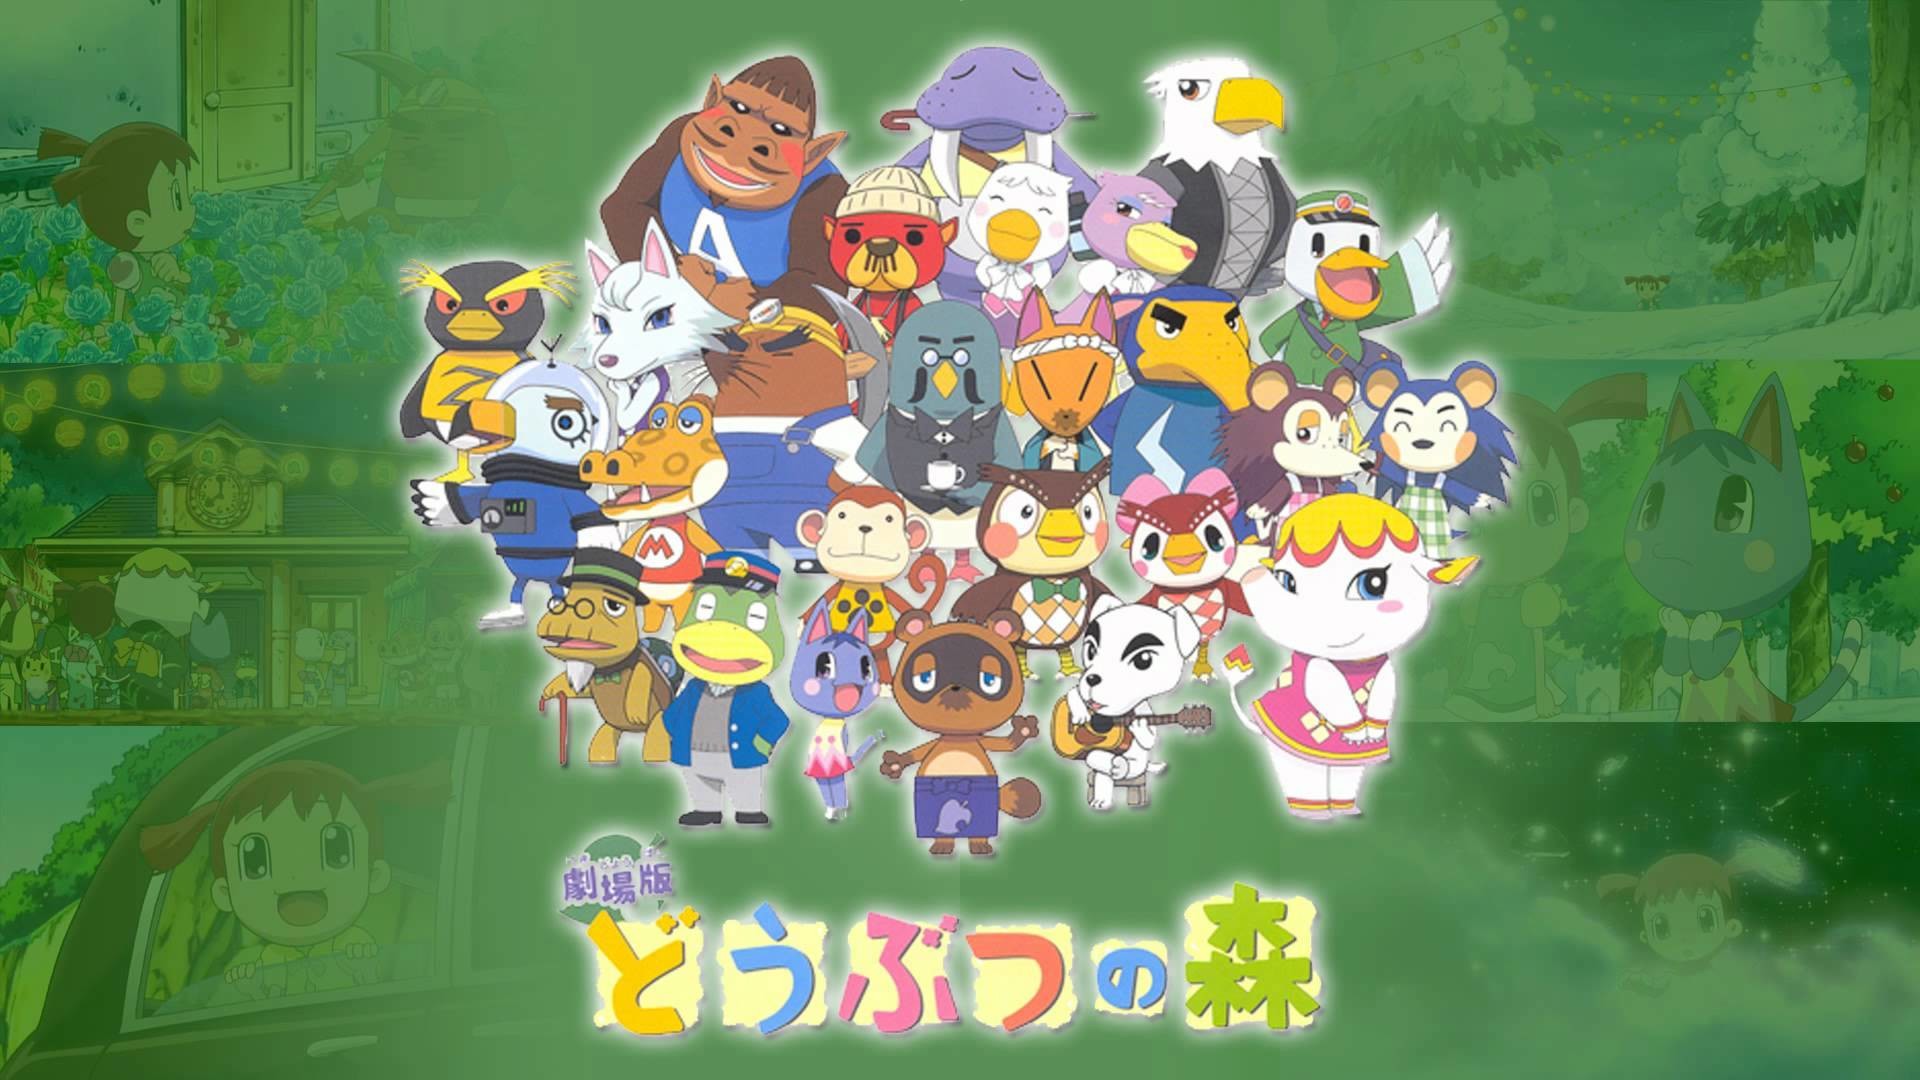 1920x1080 ... Animal Crossing The Movie Hd Wallpaper And. Download